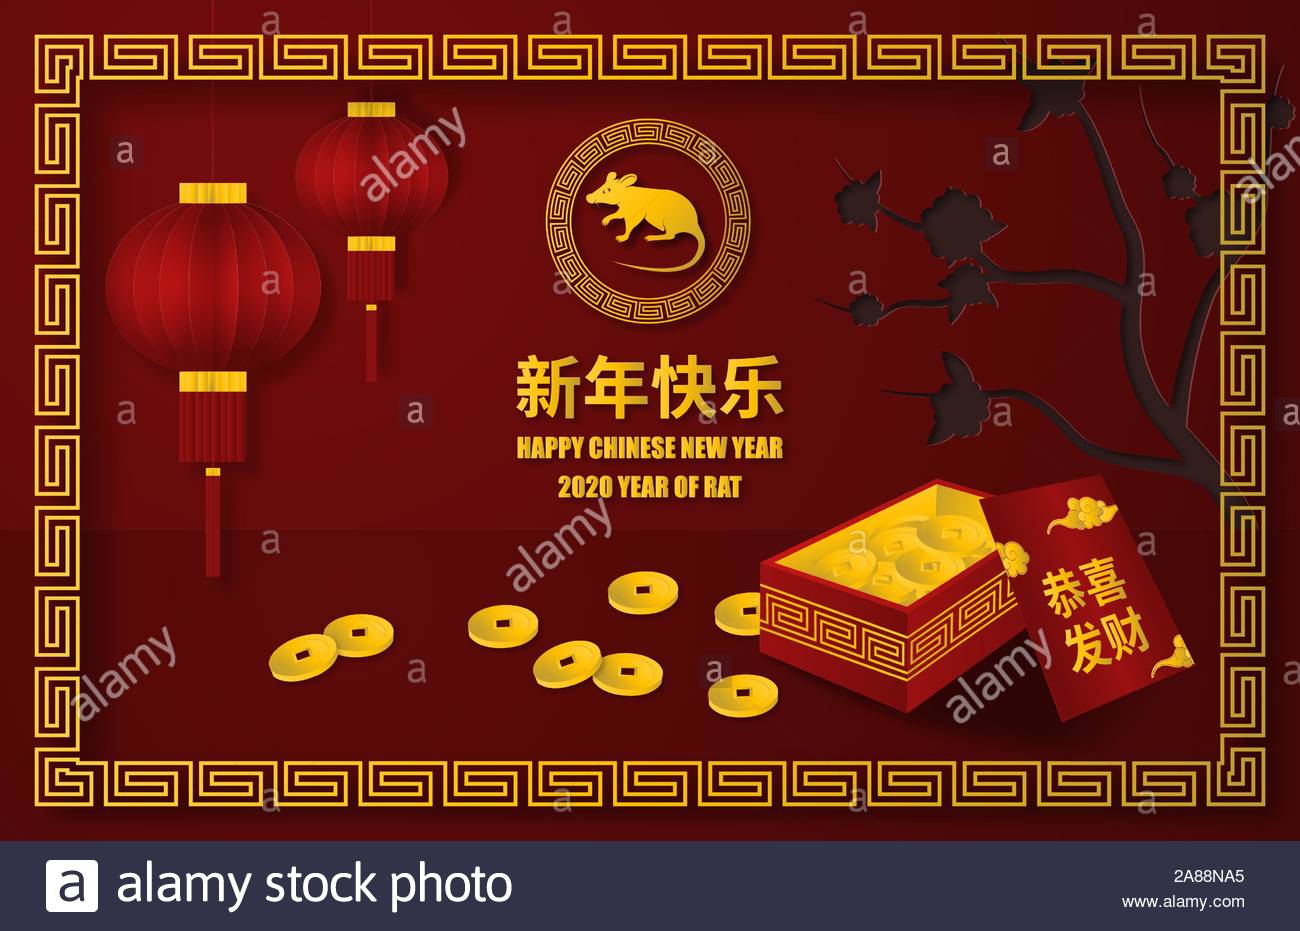 Happy Chinese New Year Background In Paper Cut Style Of